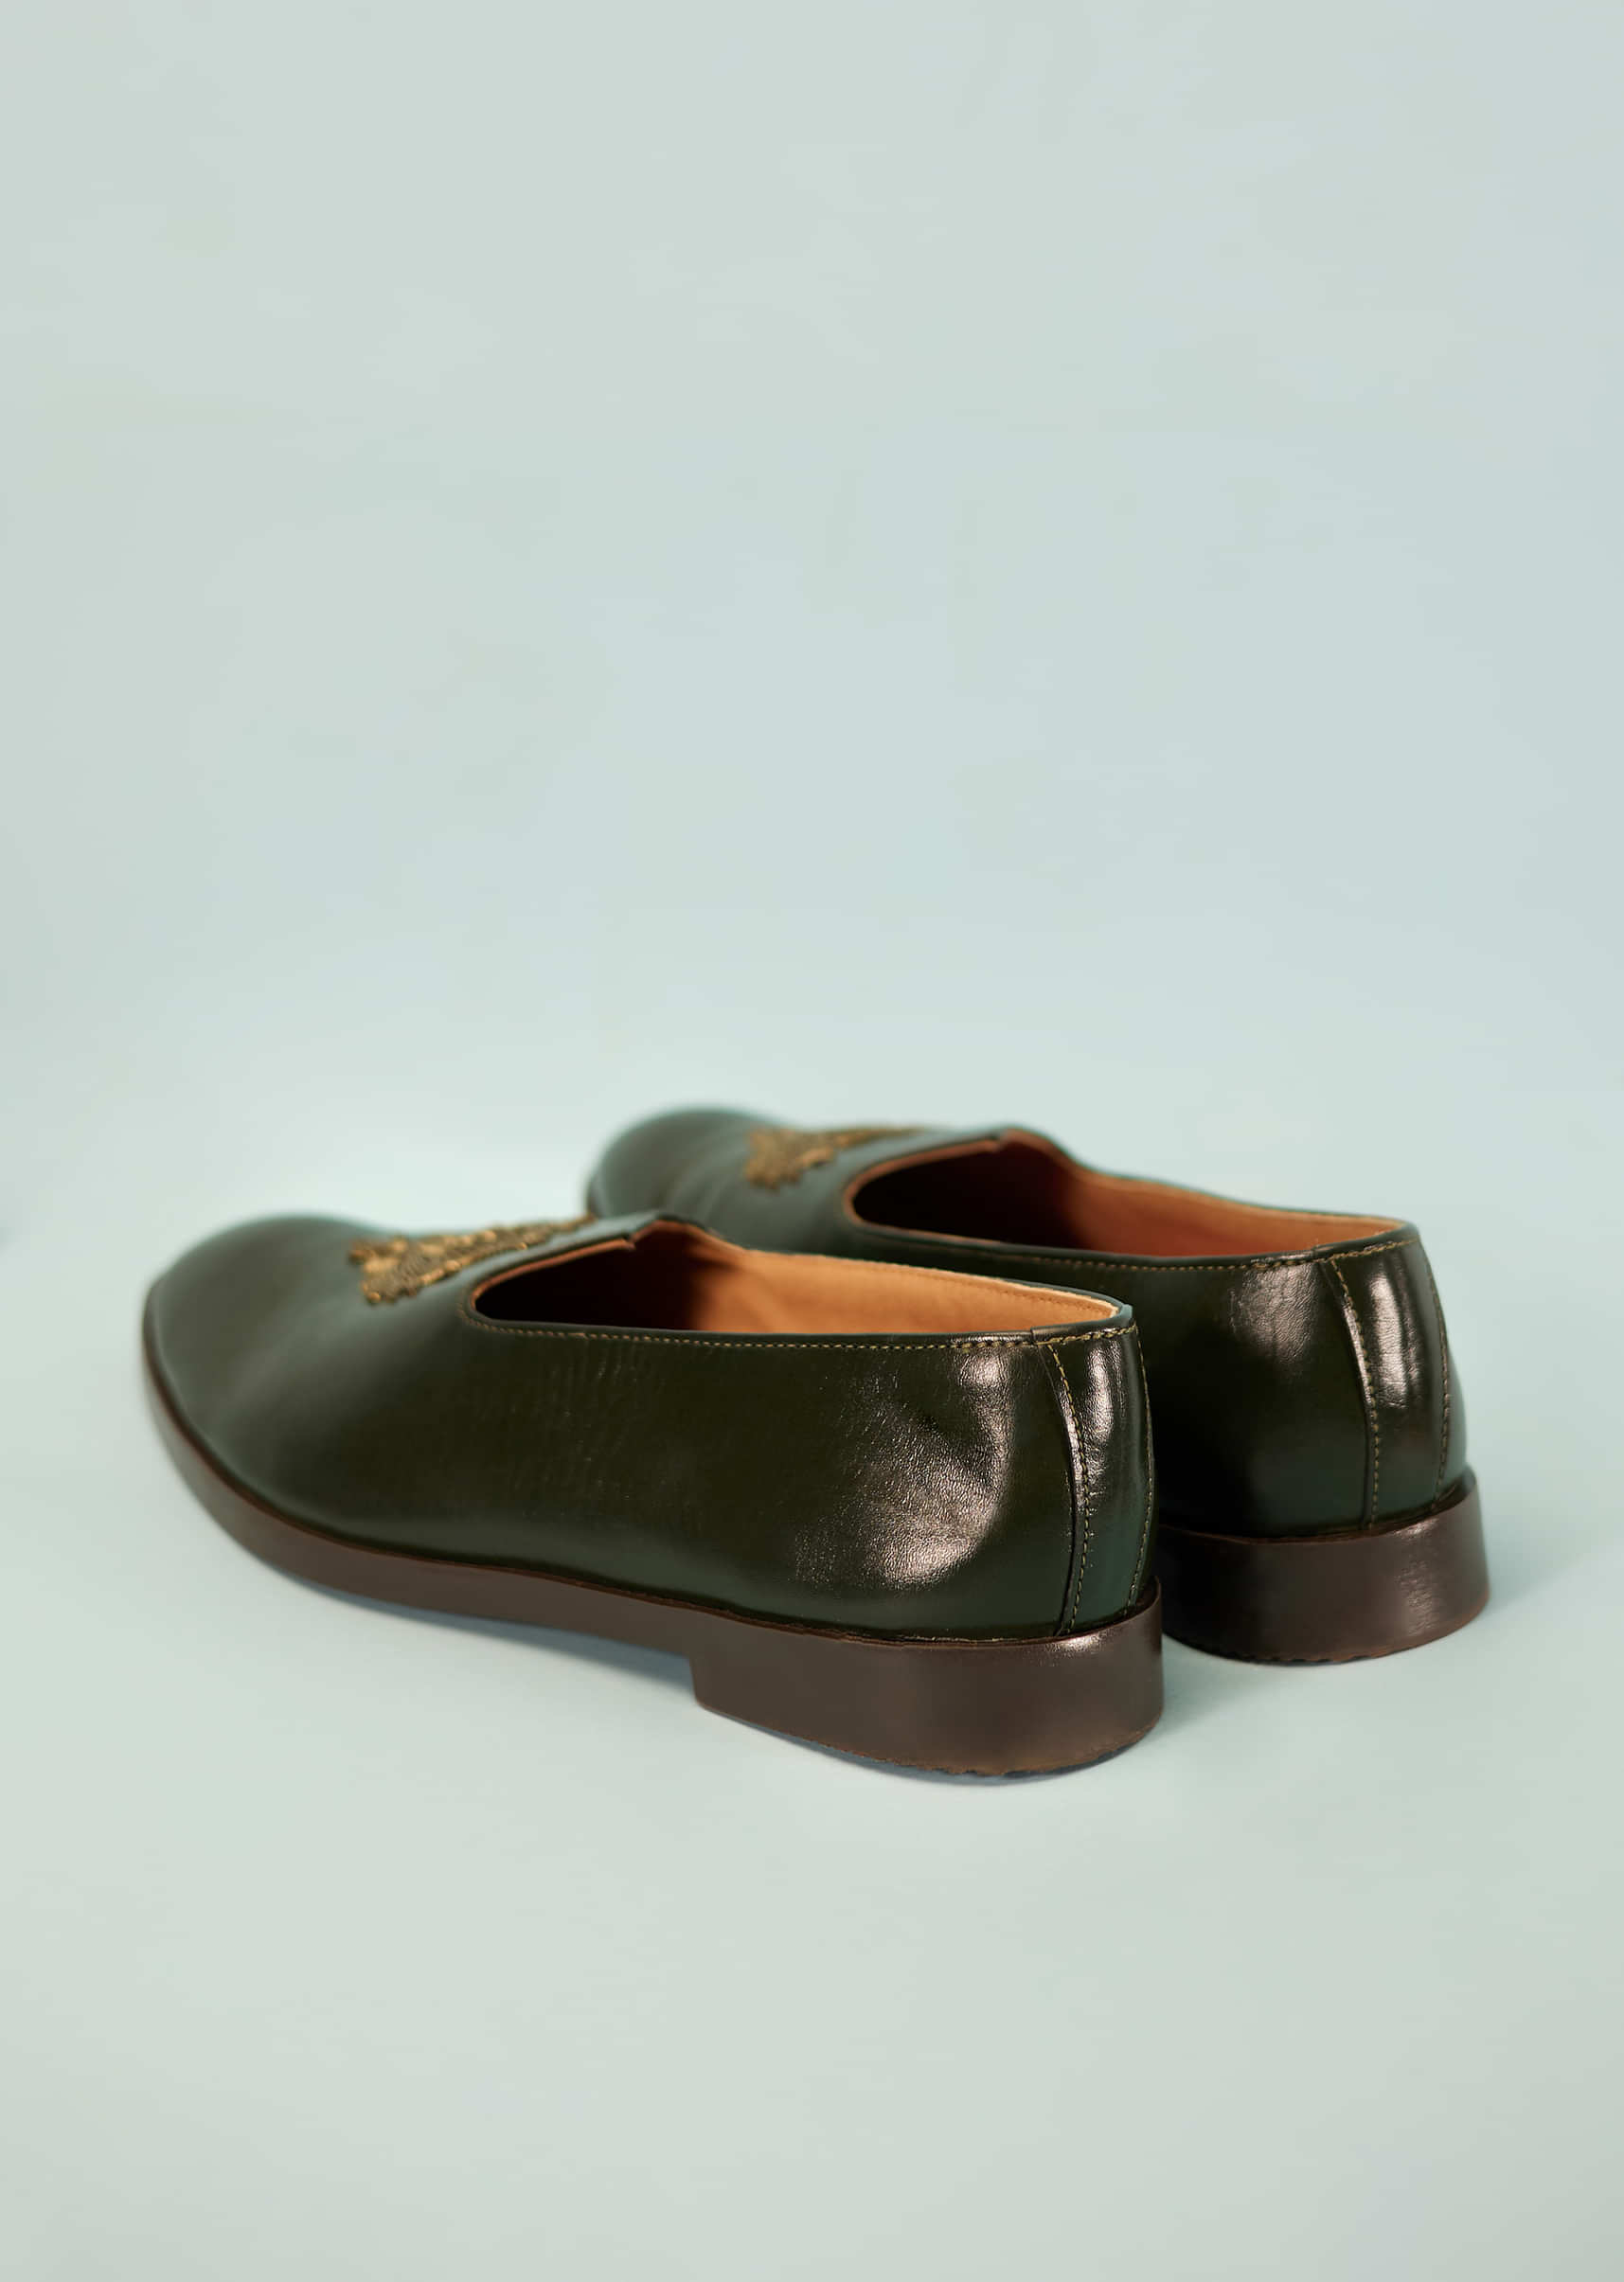 Olive Green Mules For Men In Suede With Embroidery